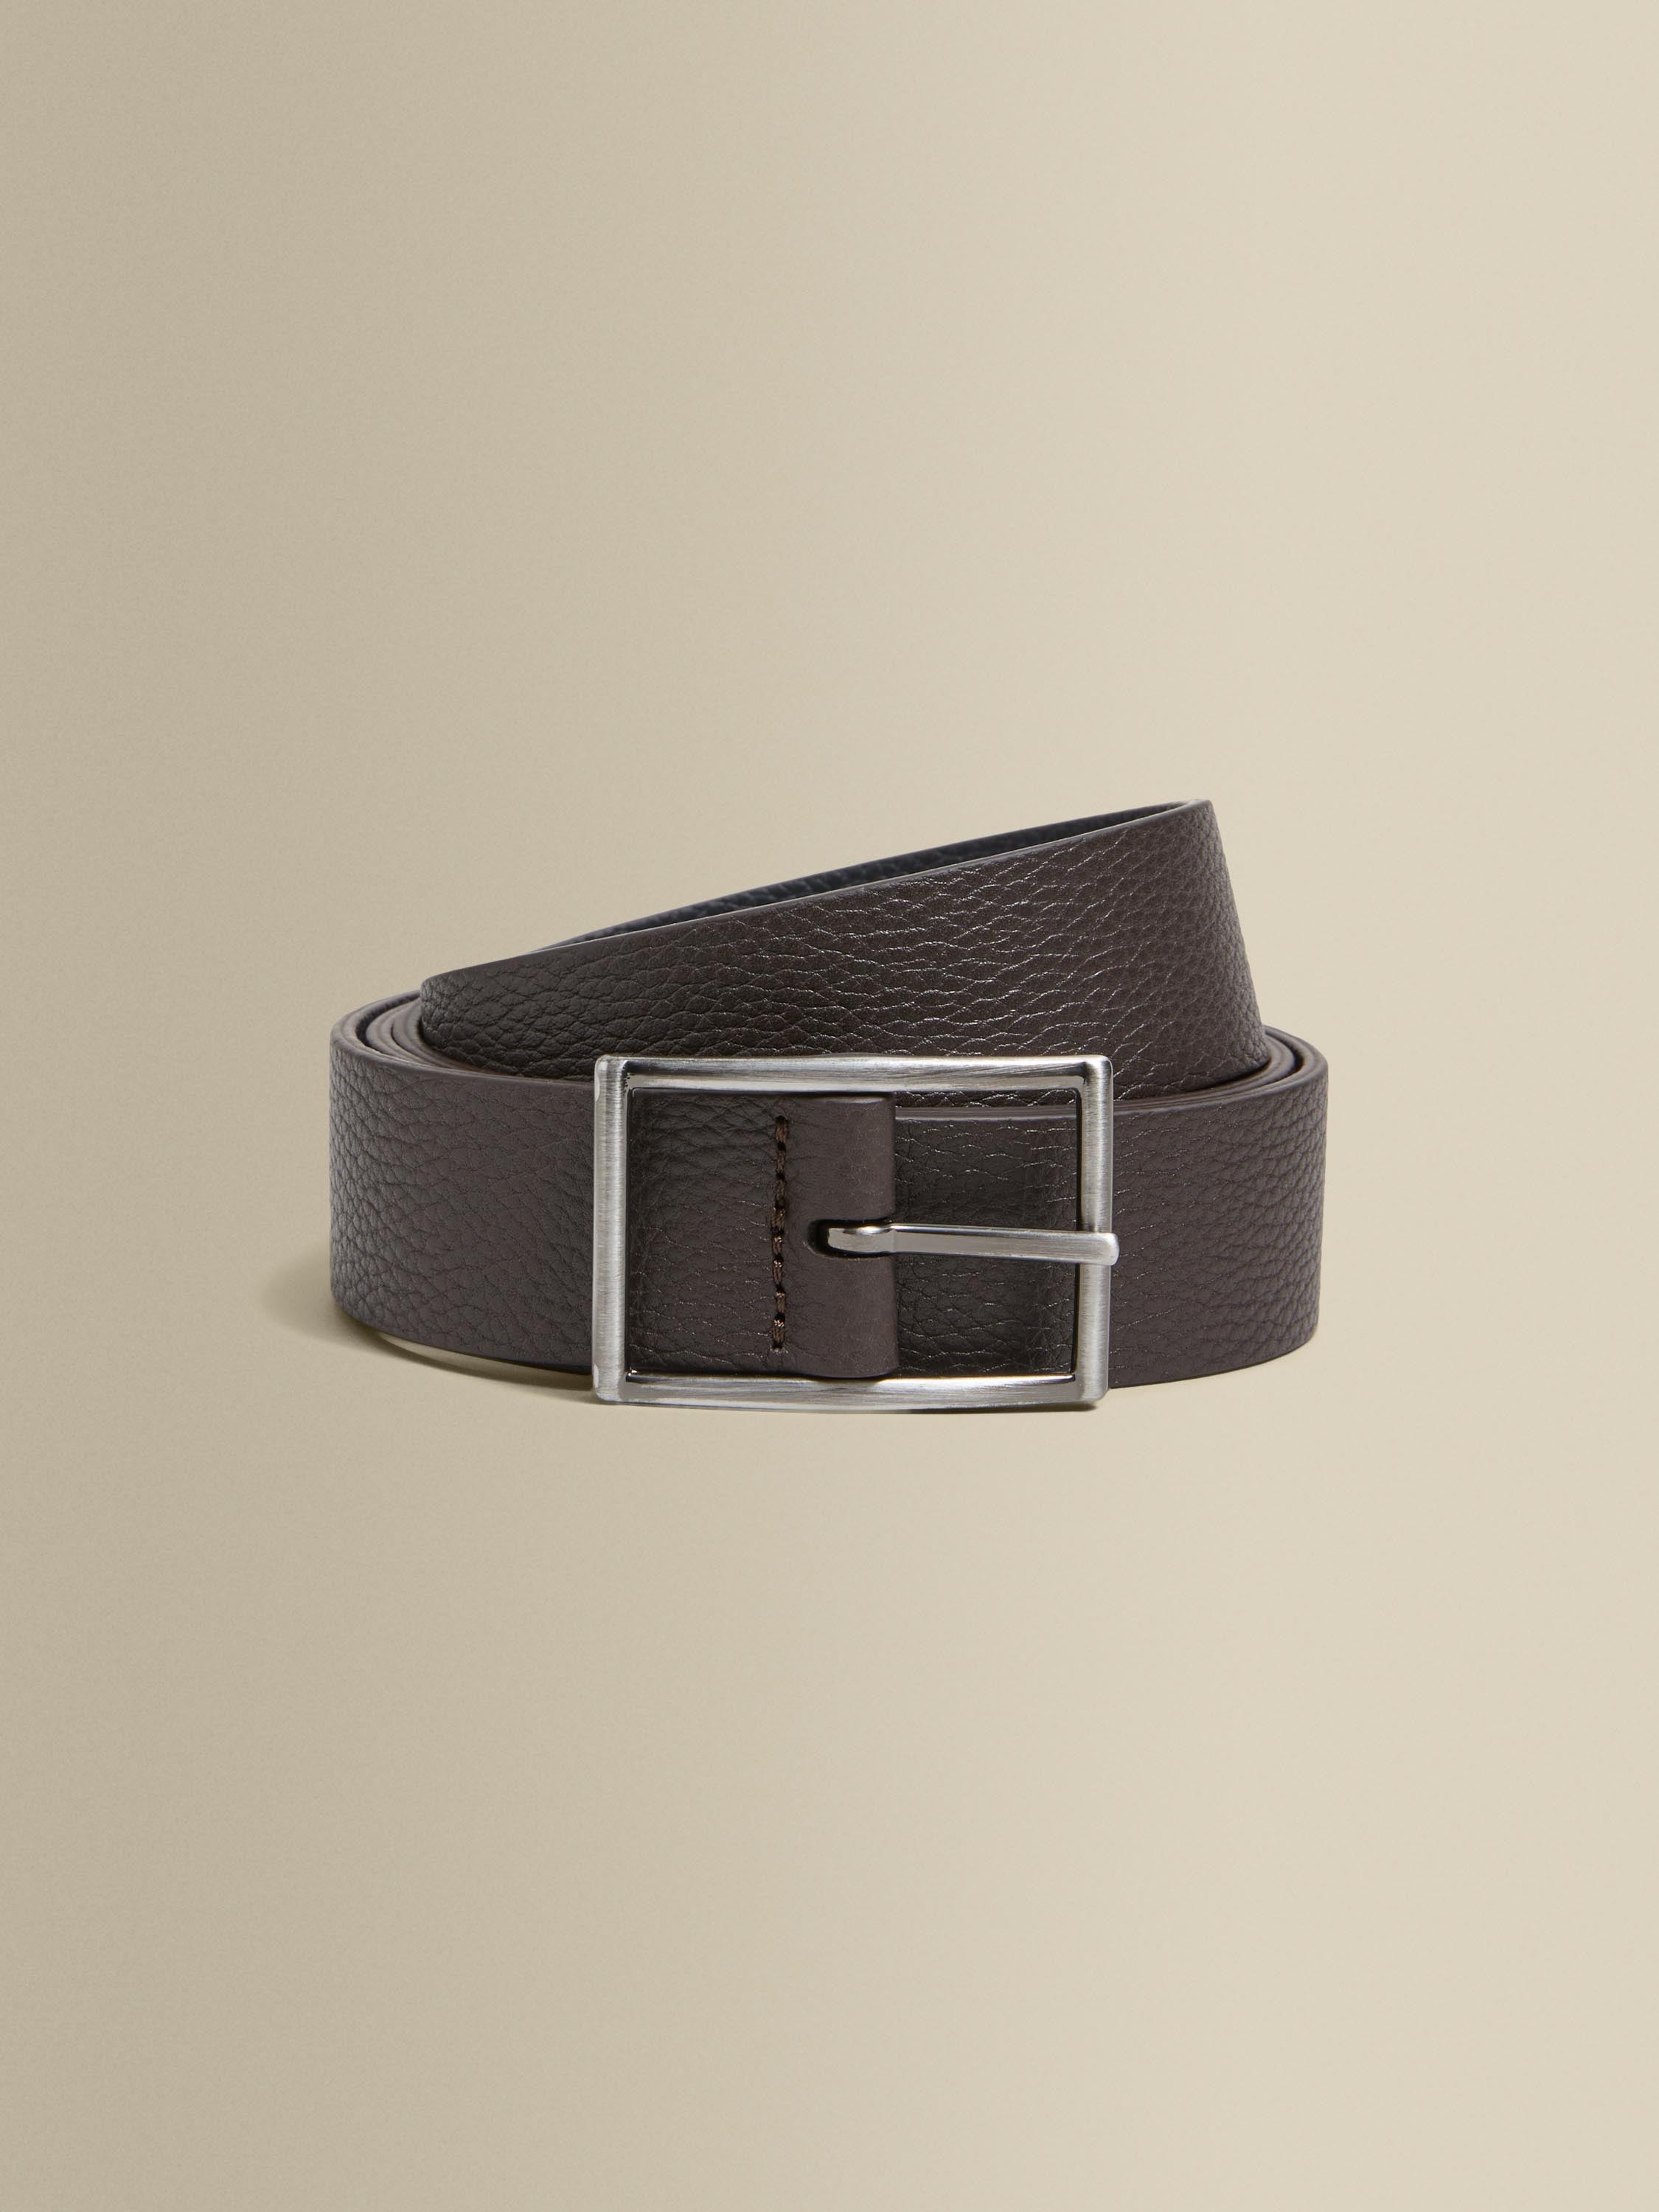 Textured Leather Reversible Belt Navy Brown Product Main